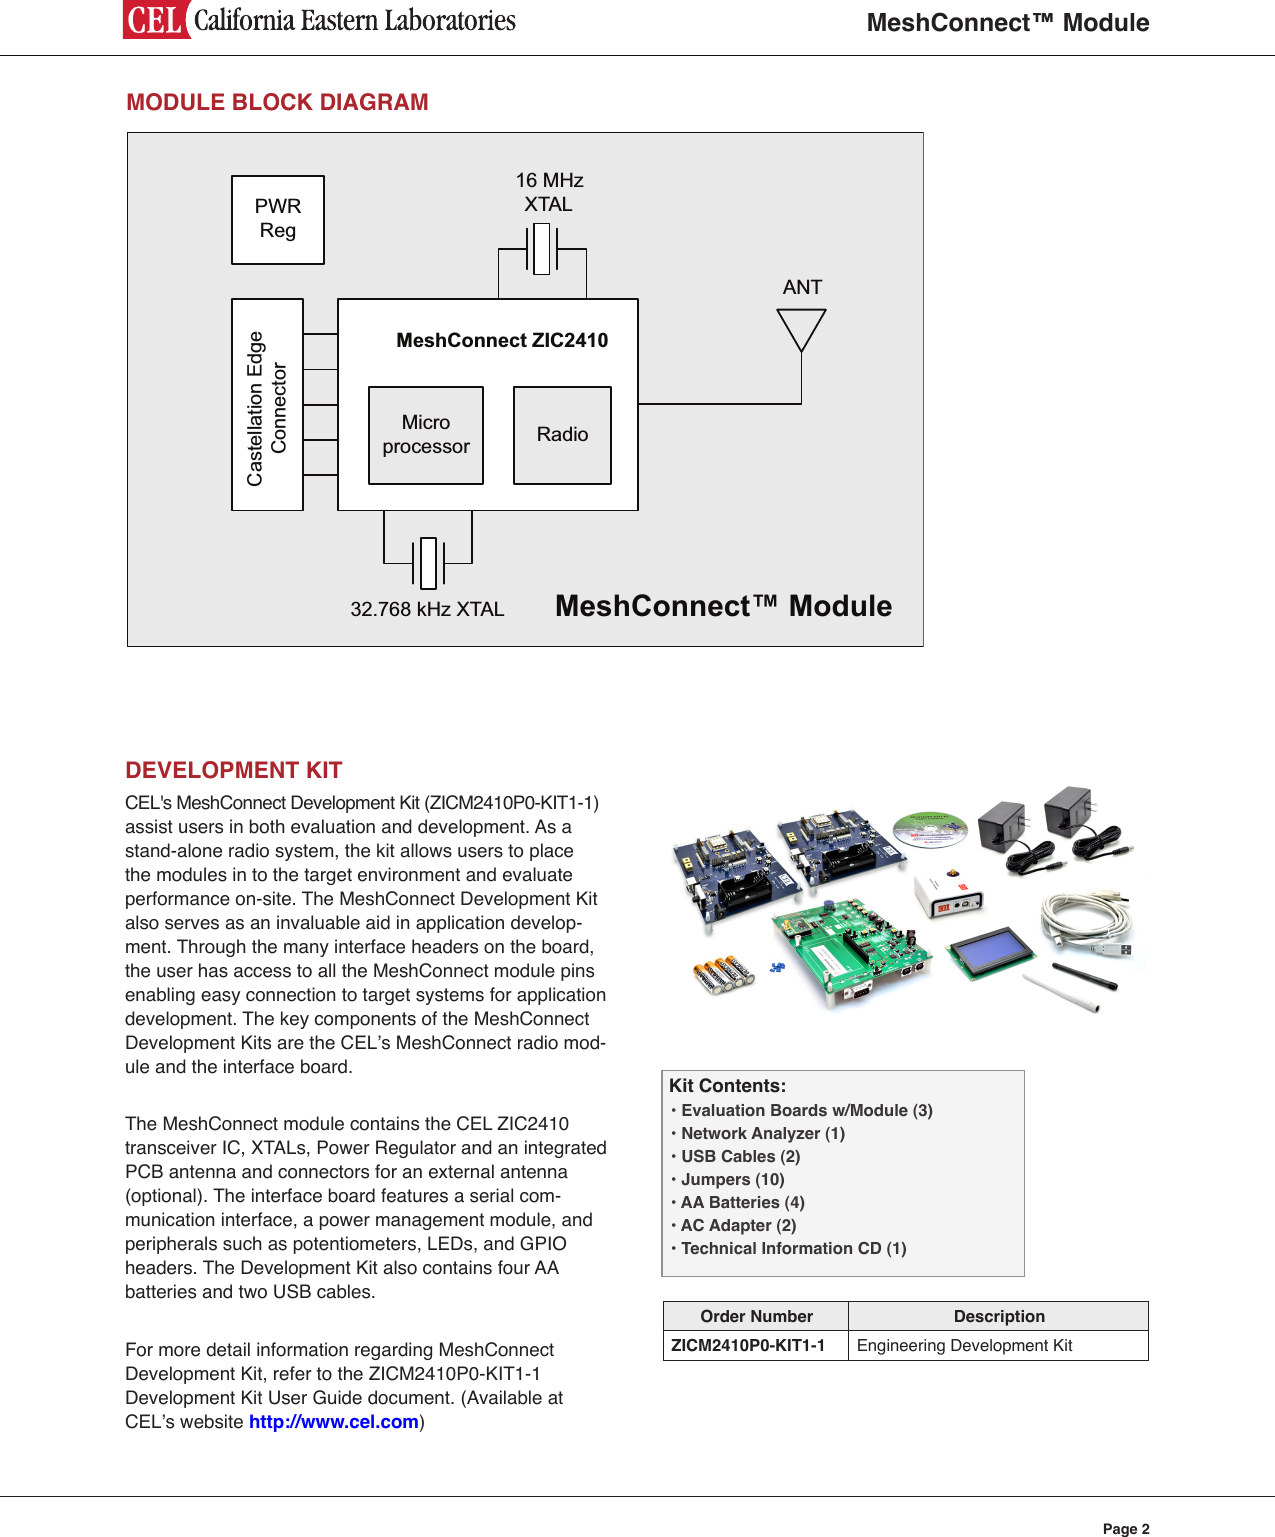 MeshConnect™ ModulePage 2MODULE BLOCK DIAGRAM16 MHz 32.768 kHz XTALXTALRadioMicroprocessorMeshConnect ZIC2410 ANTCastellation Edge ConnectorPWR RegMeshConnect™ ModuleDEVELOPMENT KITCEL&apos;s MeshConnect Development Kit (ZICM2410P0-KIT1-1) assist users in both evaluation and development. As a stand-alone radio system, the kit allows users to place the modules in to the target environment and evaluate performance on-site. The MeshConnect Development Kit also serves as an invaluable aid in application develop-ment. Through the many interface headers on the board, the user has access to all the MeshConnect module pins enabling easy connection to target systems for application development. The key components of the MeshConnect Development Kits are the CEL’s MeshConnect radio mod-ule and the interface board.The MeshConnect module contains the CEL ZIC2410 transceiver IC, XTALs, Power Regulator and an integrated PCB antenna and connectors for an external antenna  (optional). The interface board features a serial com-munication interface, a power management module, and peripherals such as potentiometers, LEDs, and GPIO headers. The Development Kit also contains four AA  batteries and two USB cables.For more detail information regarding MeshConnect Development Kit, refer to the ZICM2410P0-KIT1-1 Development Kit User Guide document. (Available at CEL’s website http://www.cel.com)Kit Contents:• Evaluation Boards w/Module (3)• Network Analyzer (1)• USB Cables (2)• Jumpers (10)• AA Batteries (4)• AC Adapter (2)• Technical Information CD (1)Order Number DescriptionZICM2410P0-KIT1-1 Engineering Development Kit